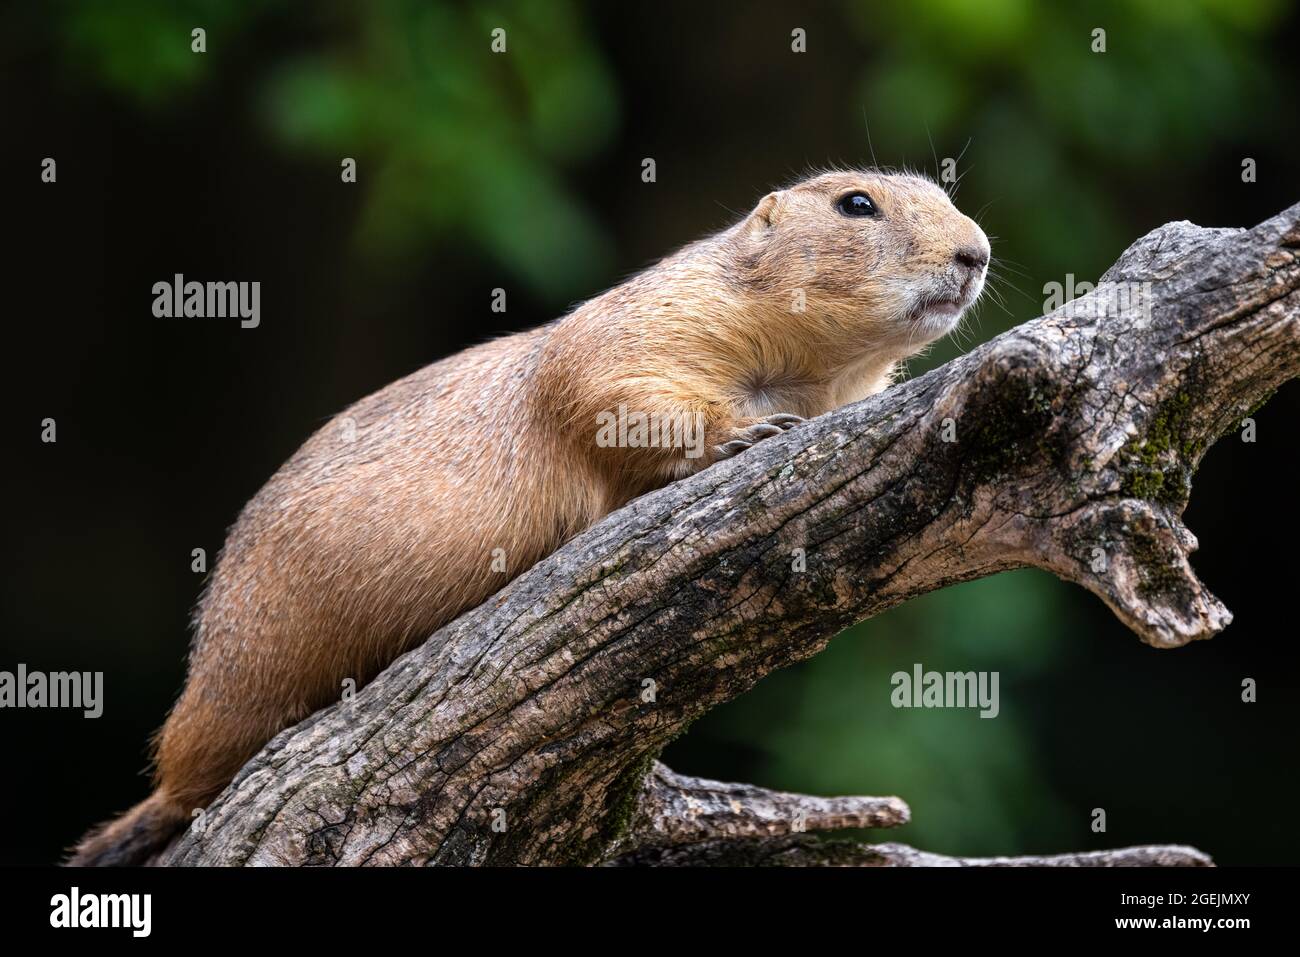 Close up of a prairie dog standing on a wooden branch against a dark bokeh background Stock Photo